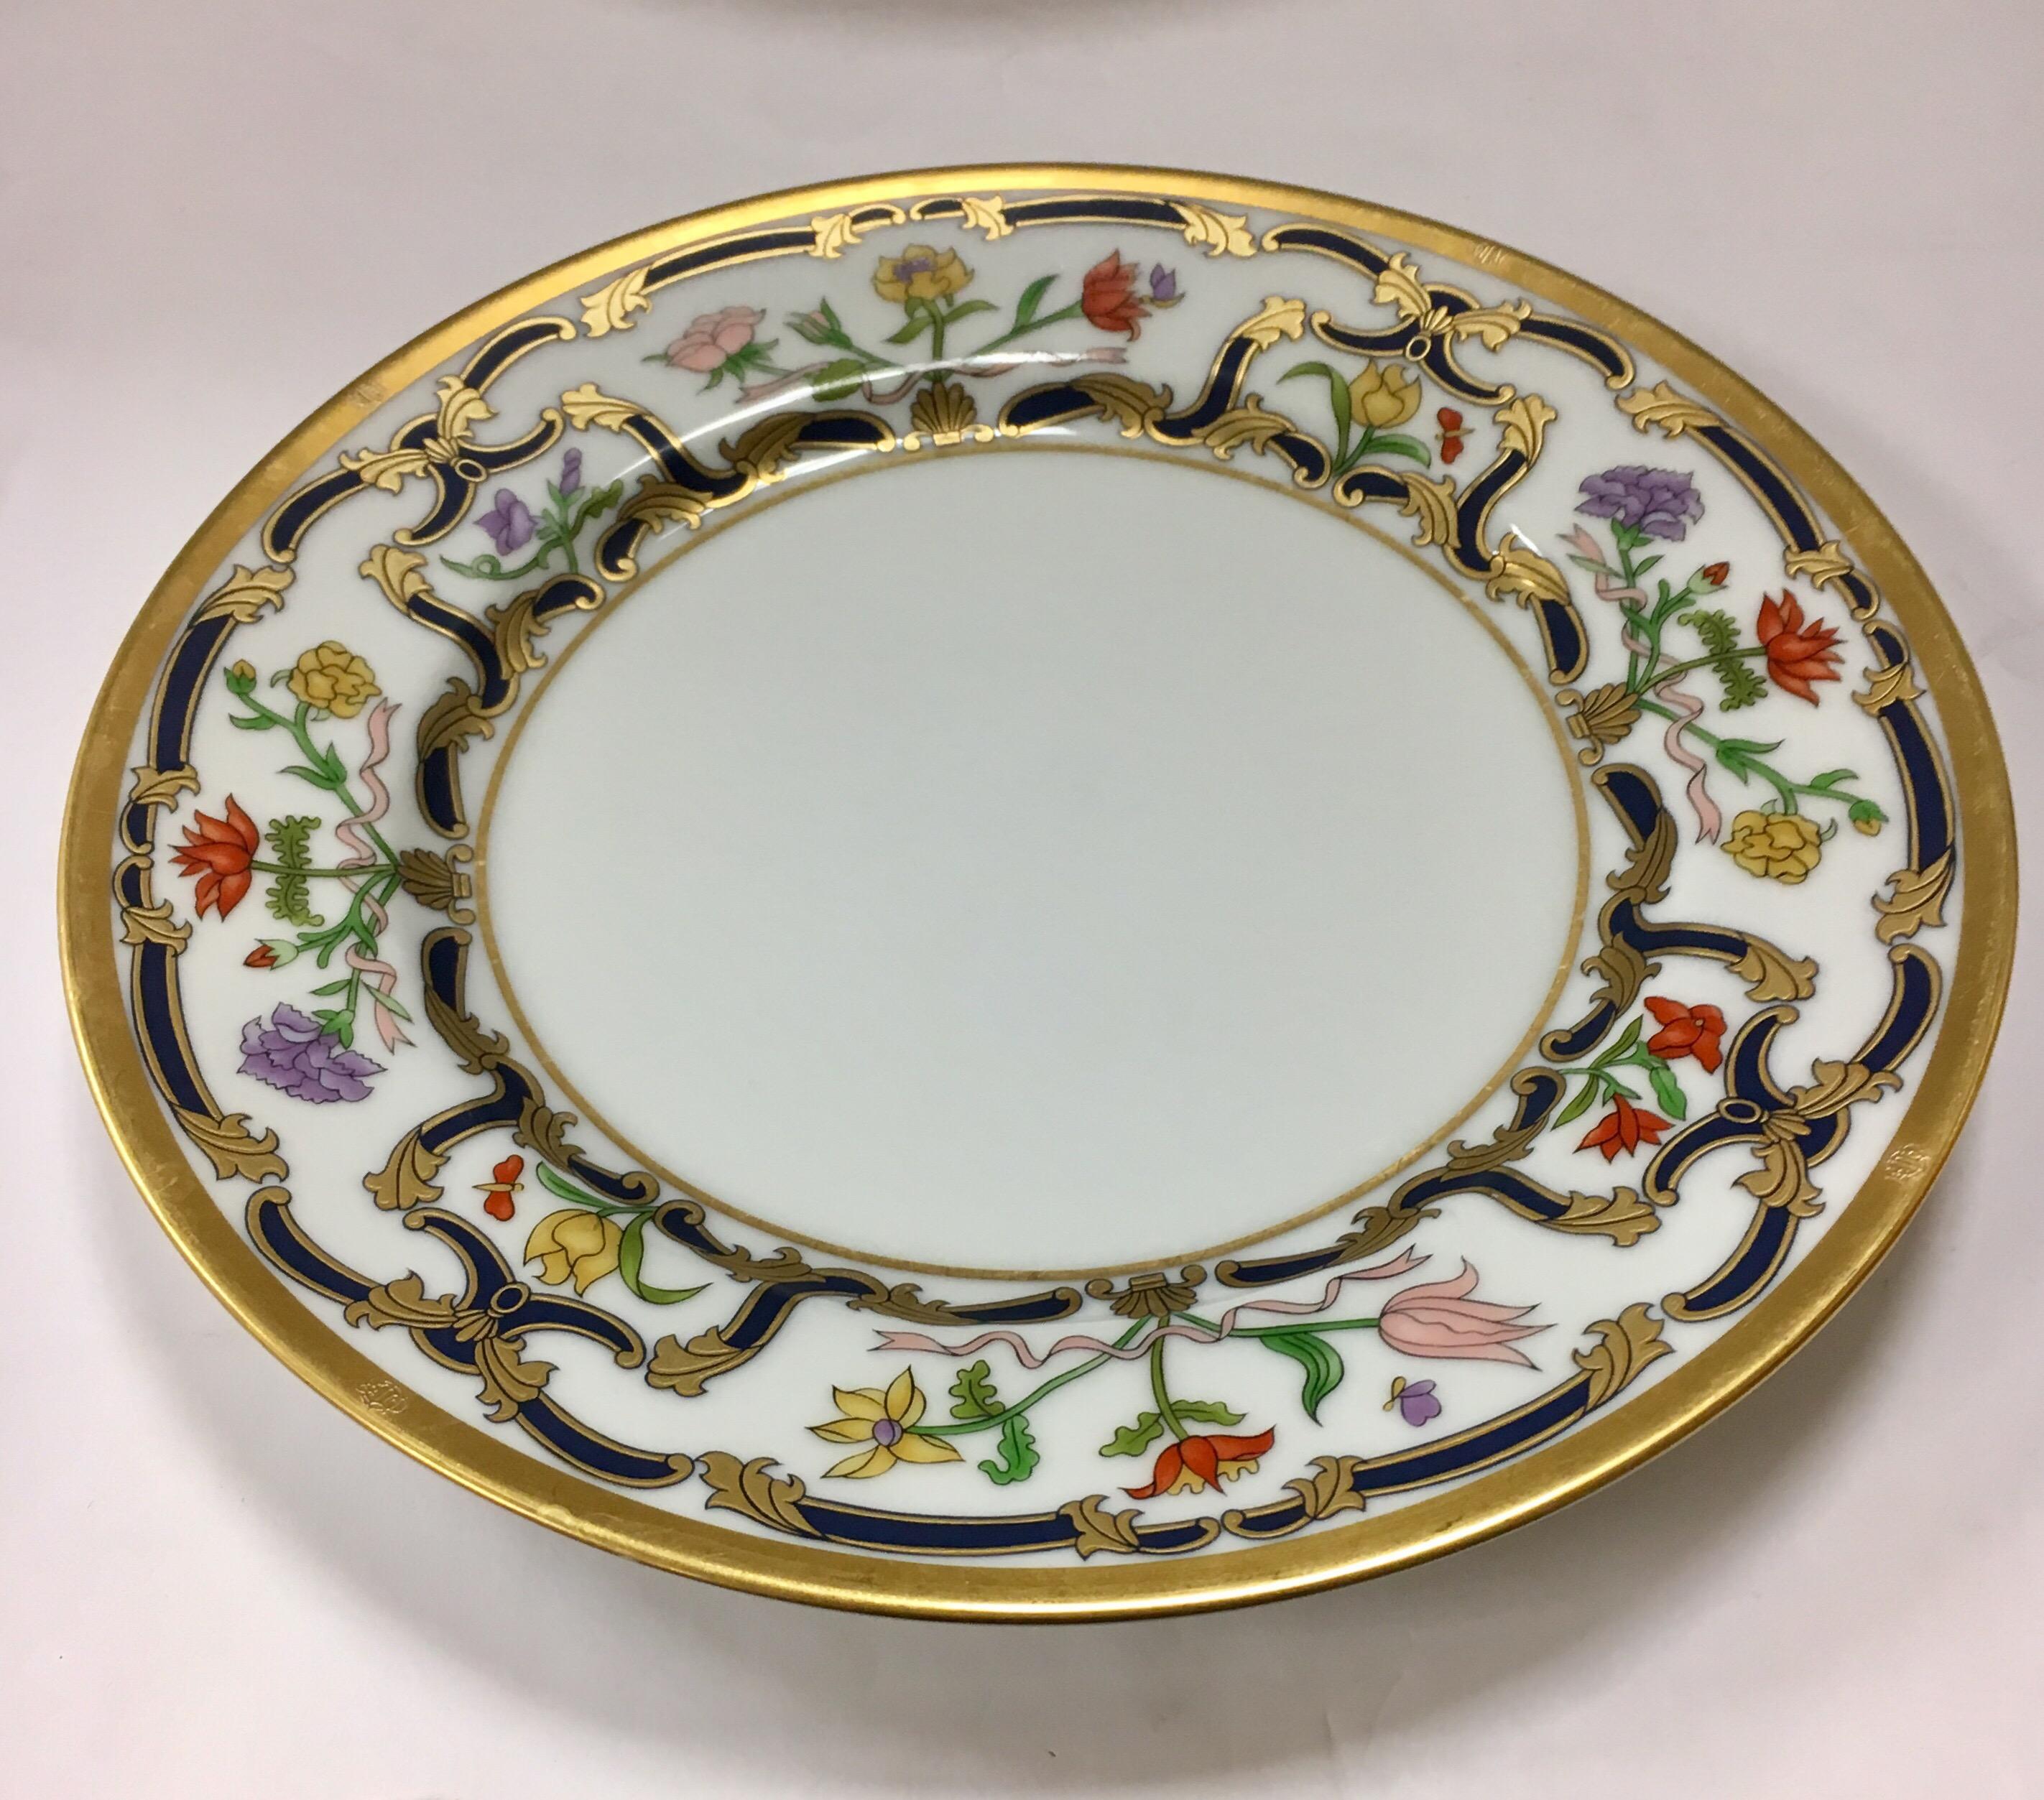 Rare, coveted and out of production Christian Dior fine porcelain china. The pattern is Renaissance and
it features the famed blue and gold scrolls and floral rim. The set was in production from 1990-1999 and then was discontinued, making this